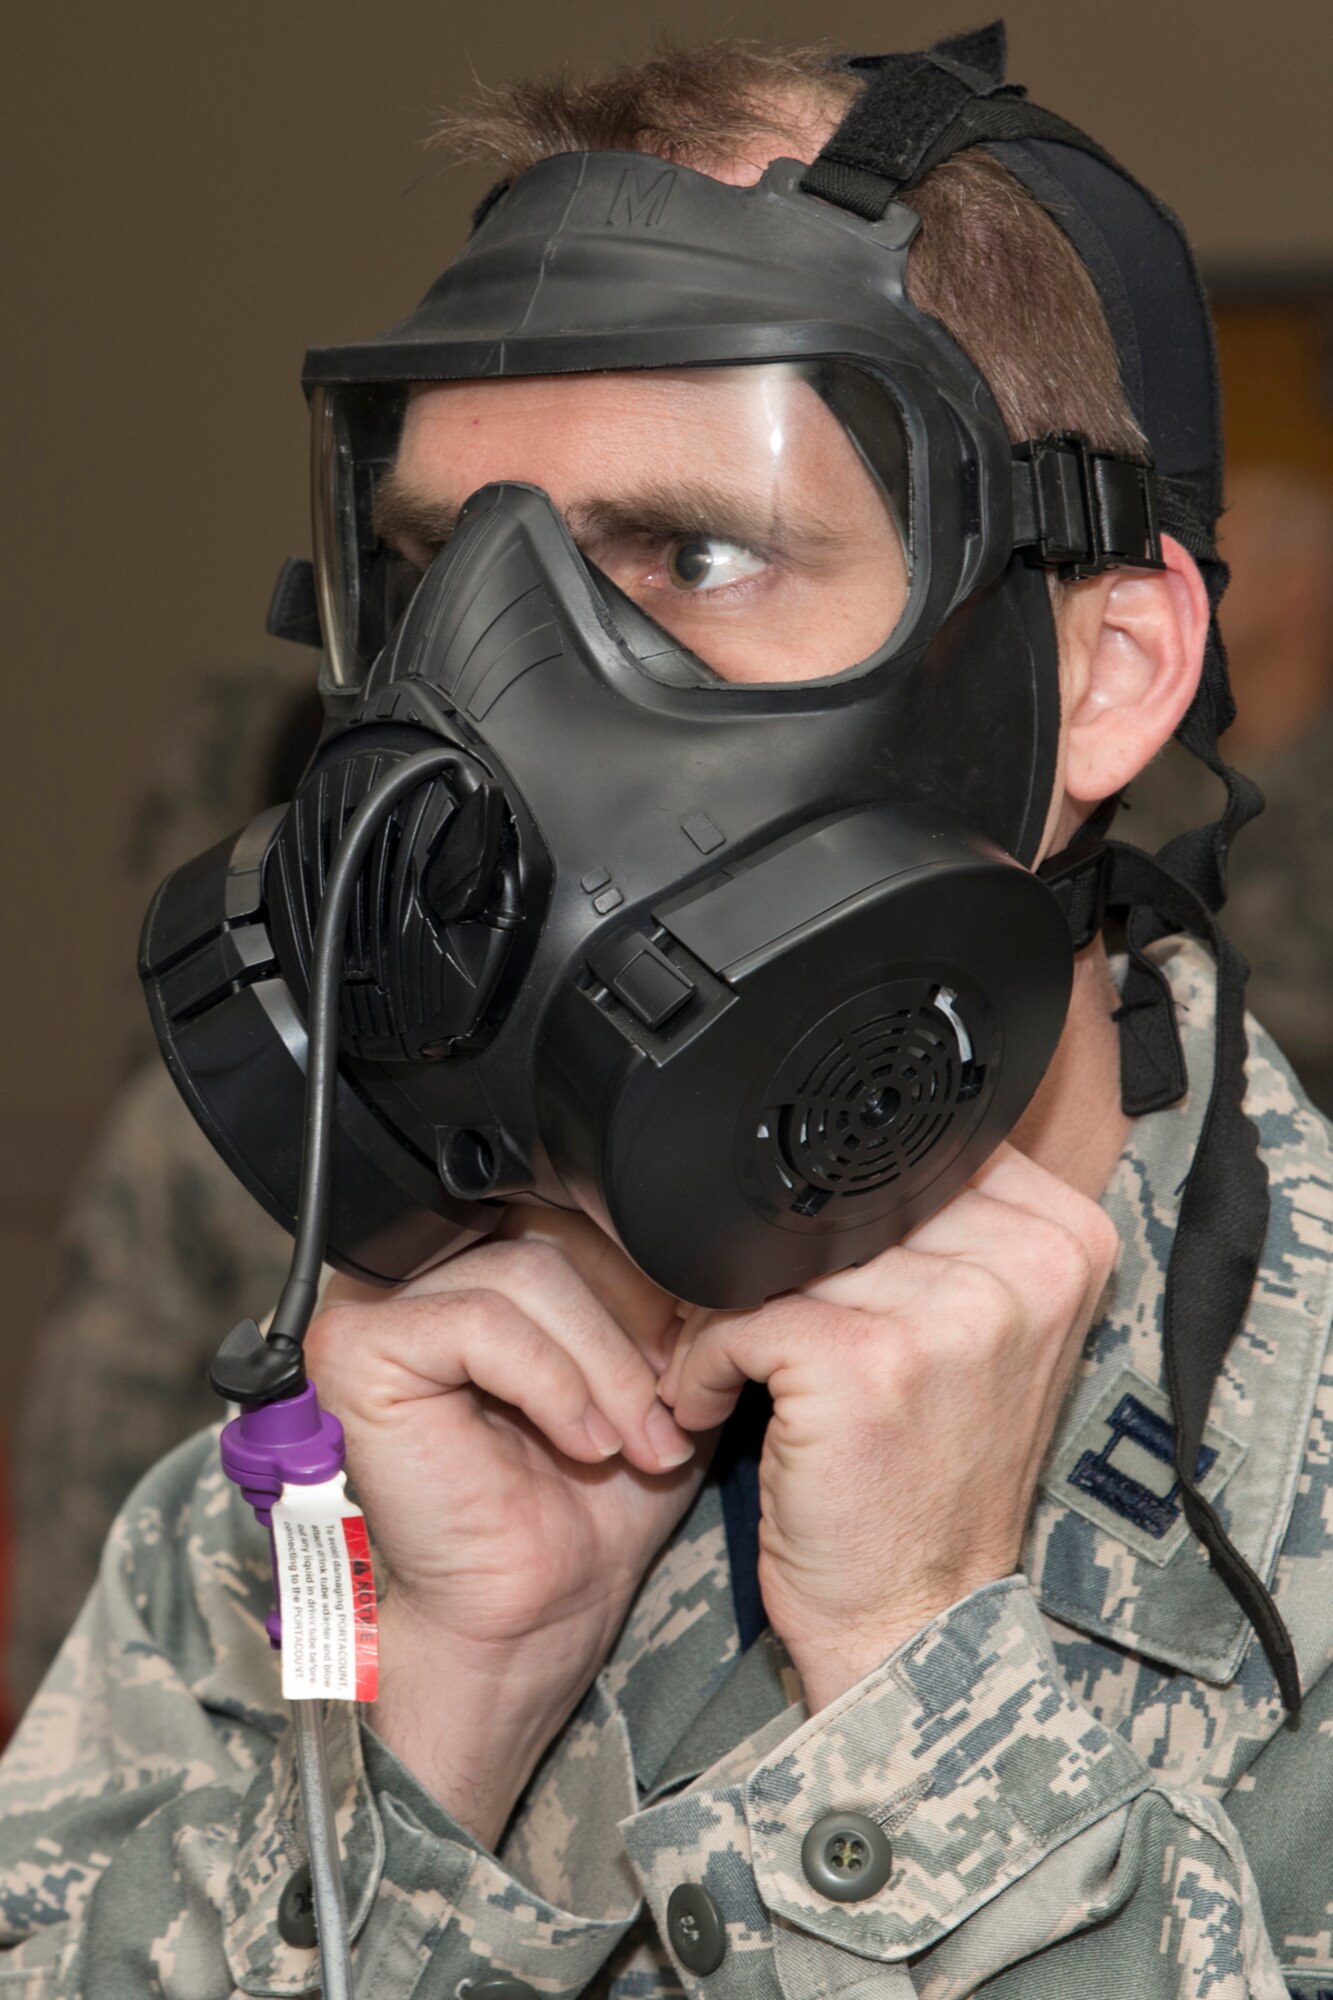 U.S. Air Force Reserve Capt. Benjamin Hulsey, the officer in charge, command post, for the 913th Airlift Group, makes adjustments during a gas mask fit test at Little Rock Air Force Base, Ark., Mar. 13, 2016. The test covers five areas: deep and normal breathing, turning of the head from left to right, nodding up and down and chewing. (U.S. Air Force photo by Master Sgt. Jeff Walston/Released)